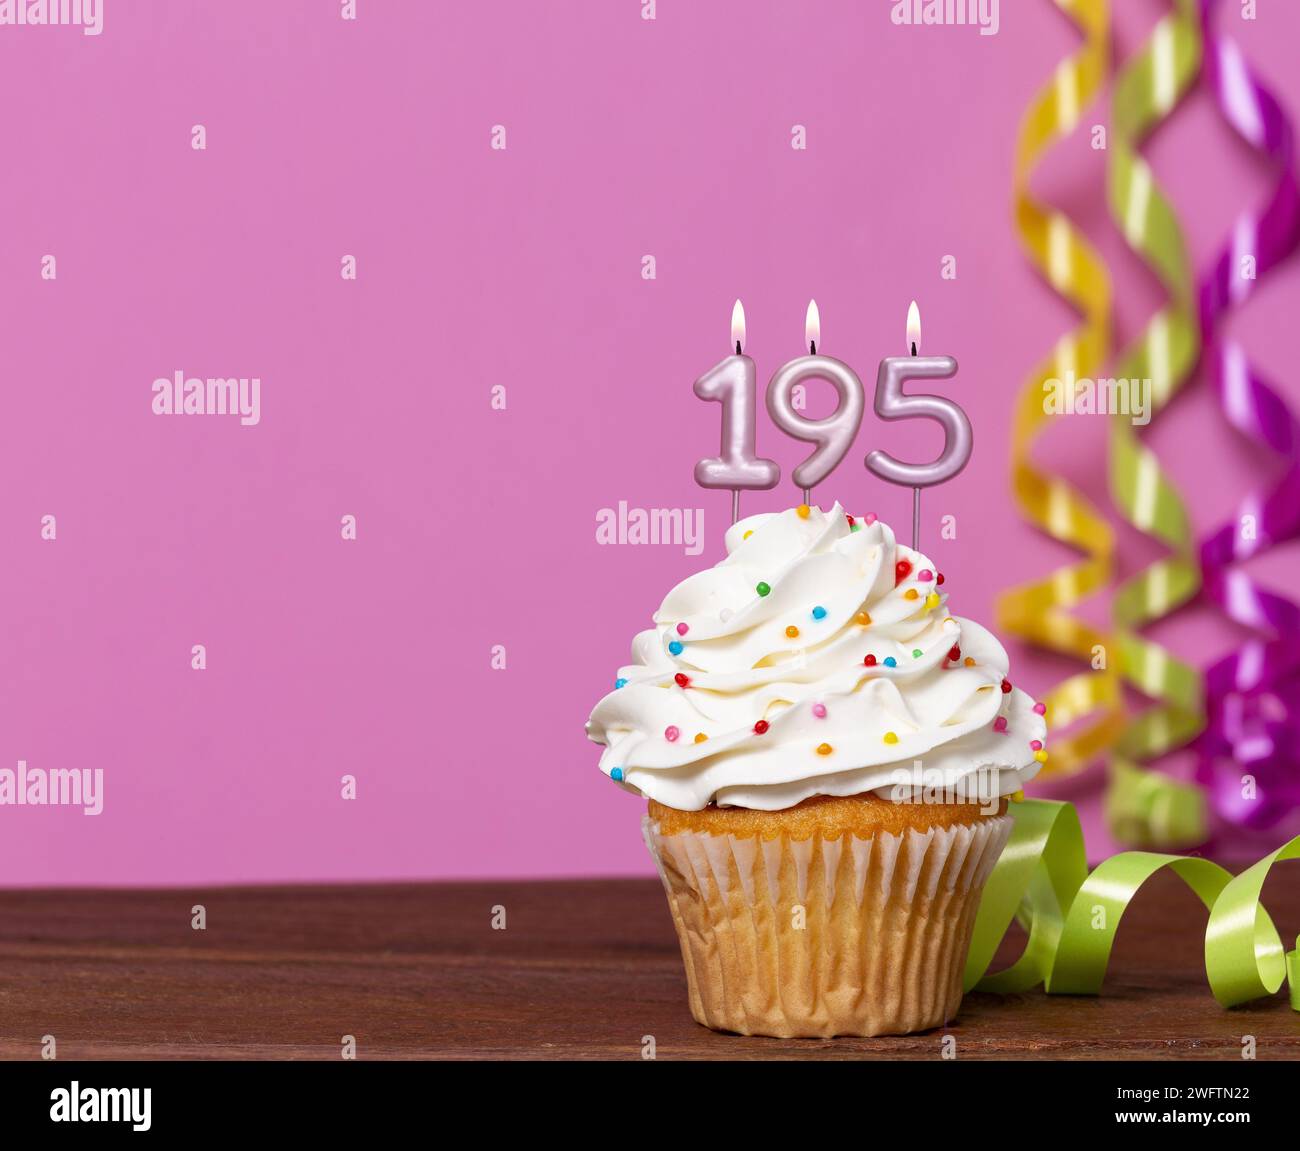 Birthday Cake With Candle Number 195 - On Pink Background. Stock Photo